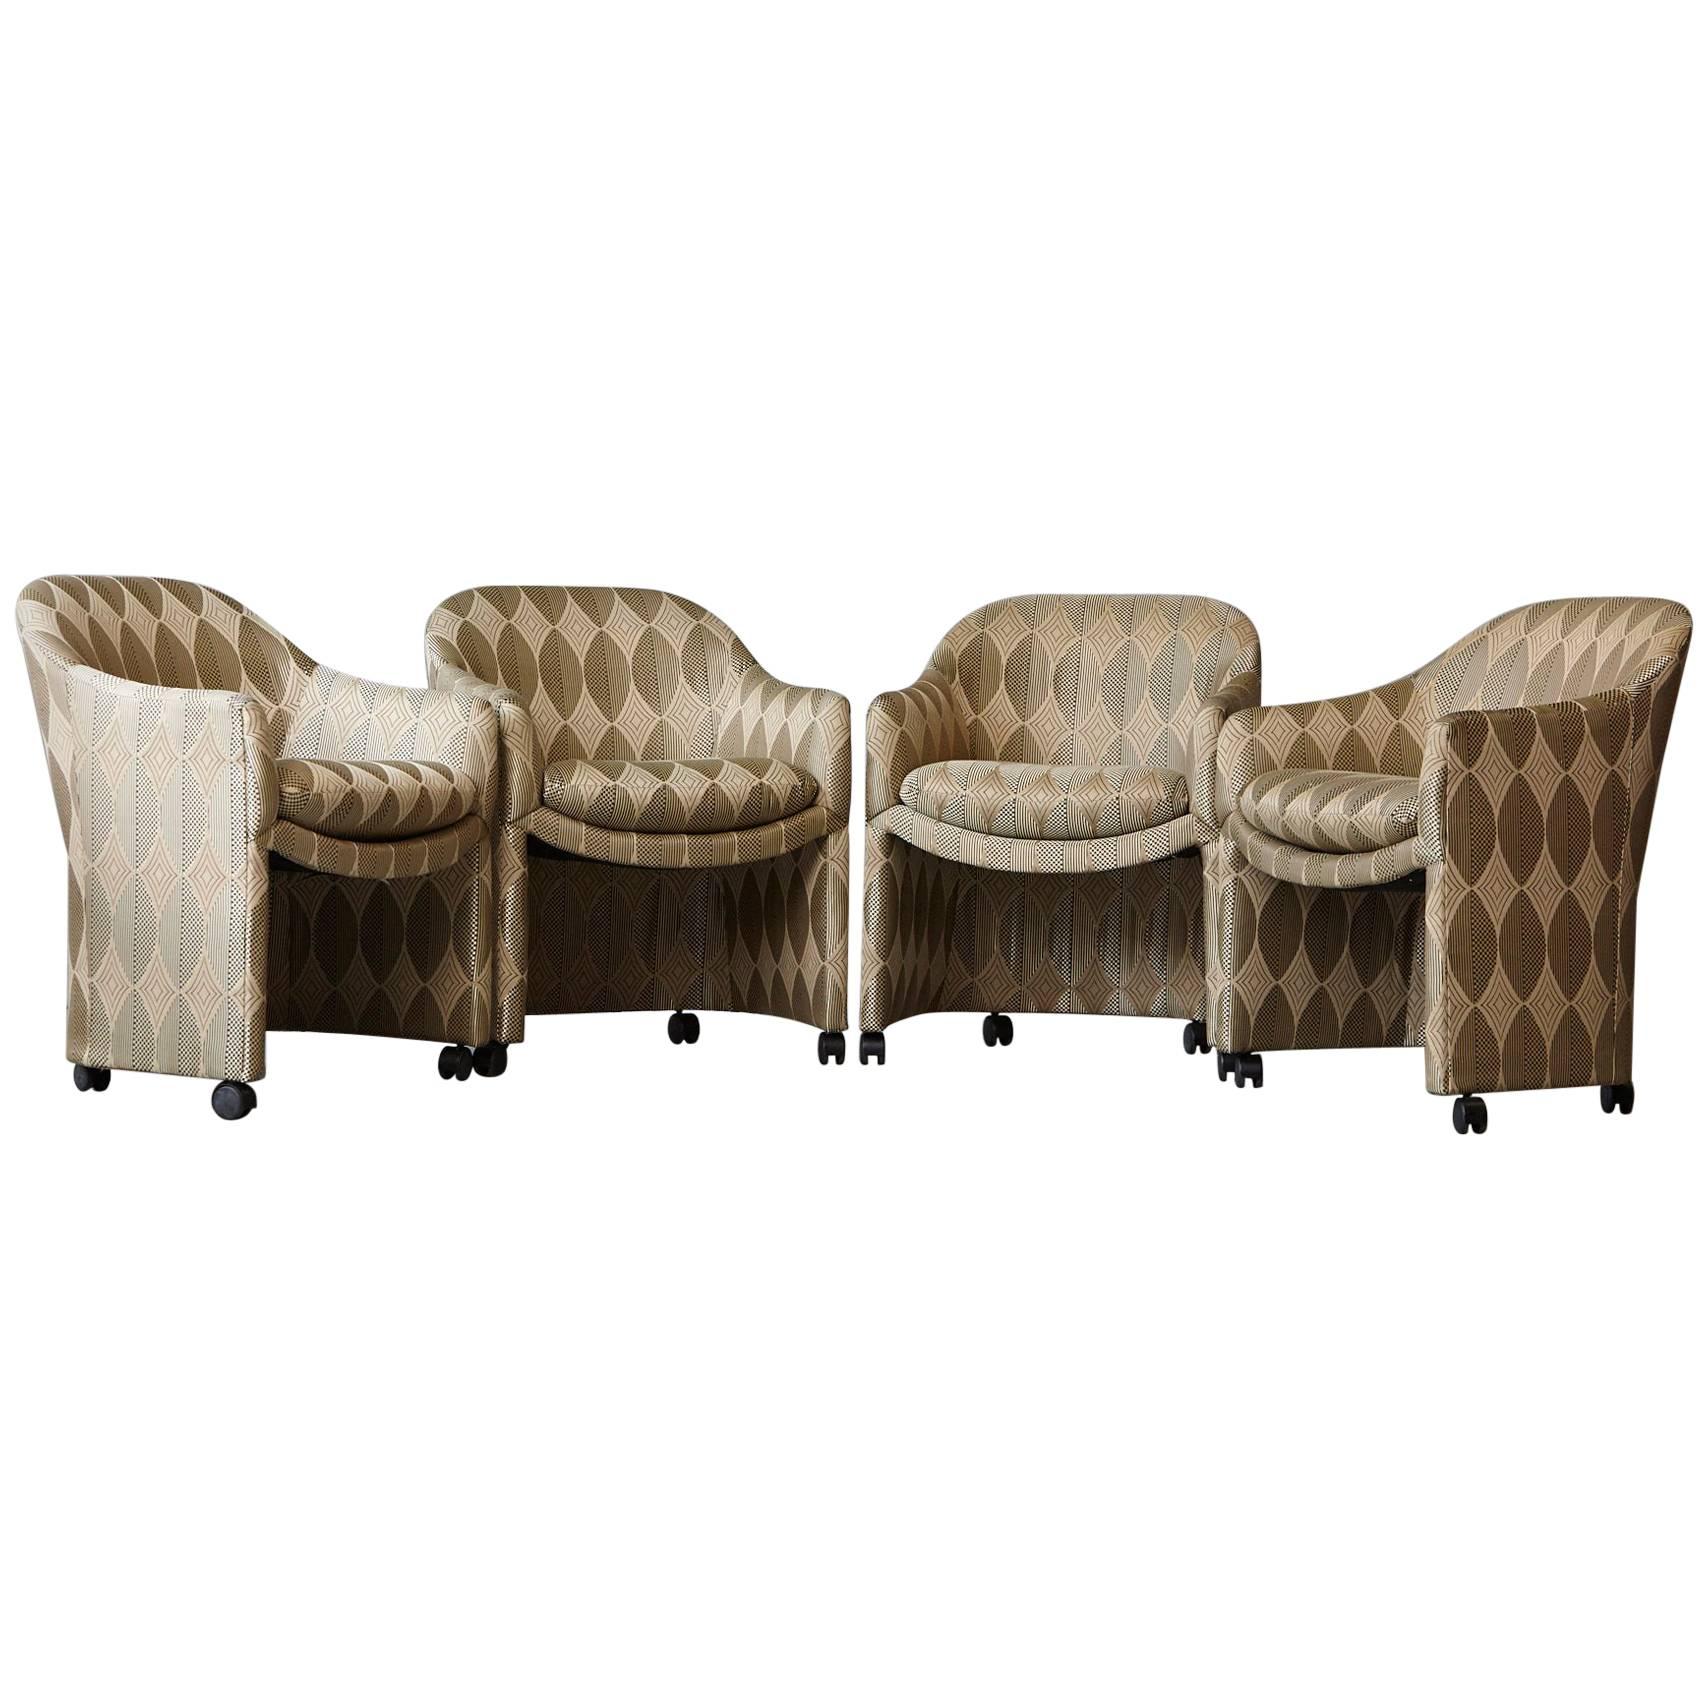 Set of Four Barrel Dining Armchairs on Casters, Milo Baughman for Thayer Coggin